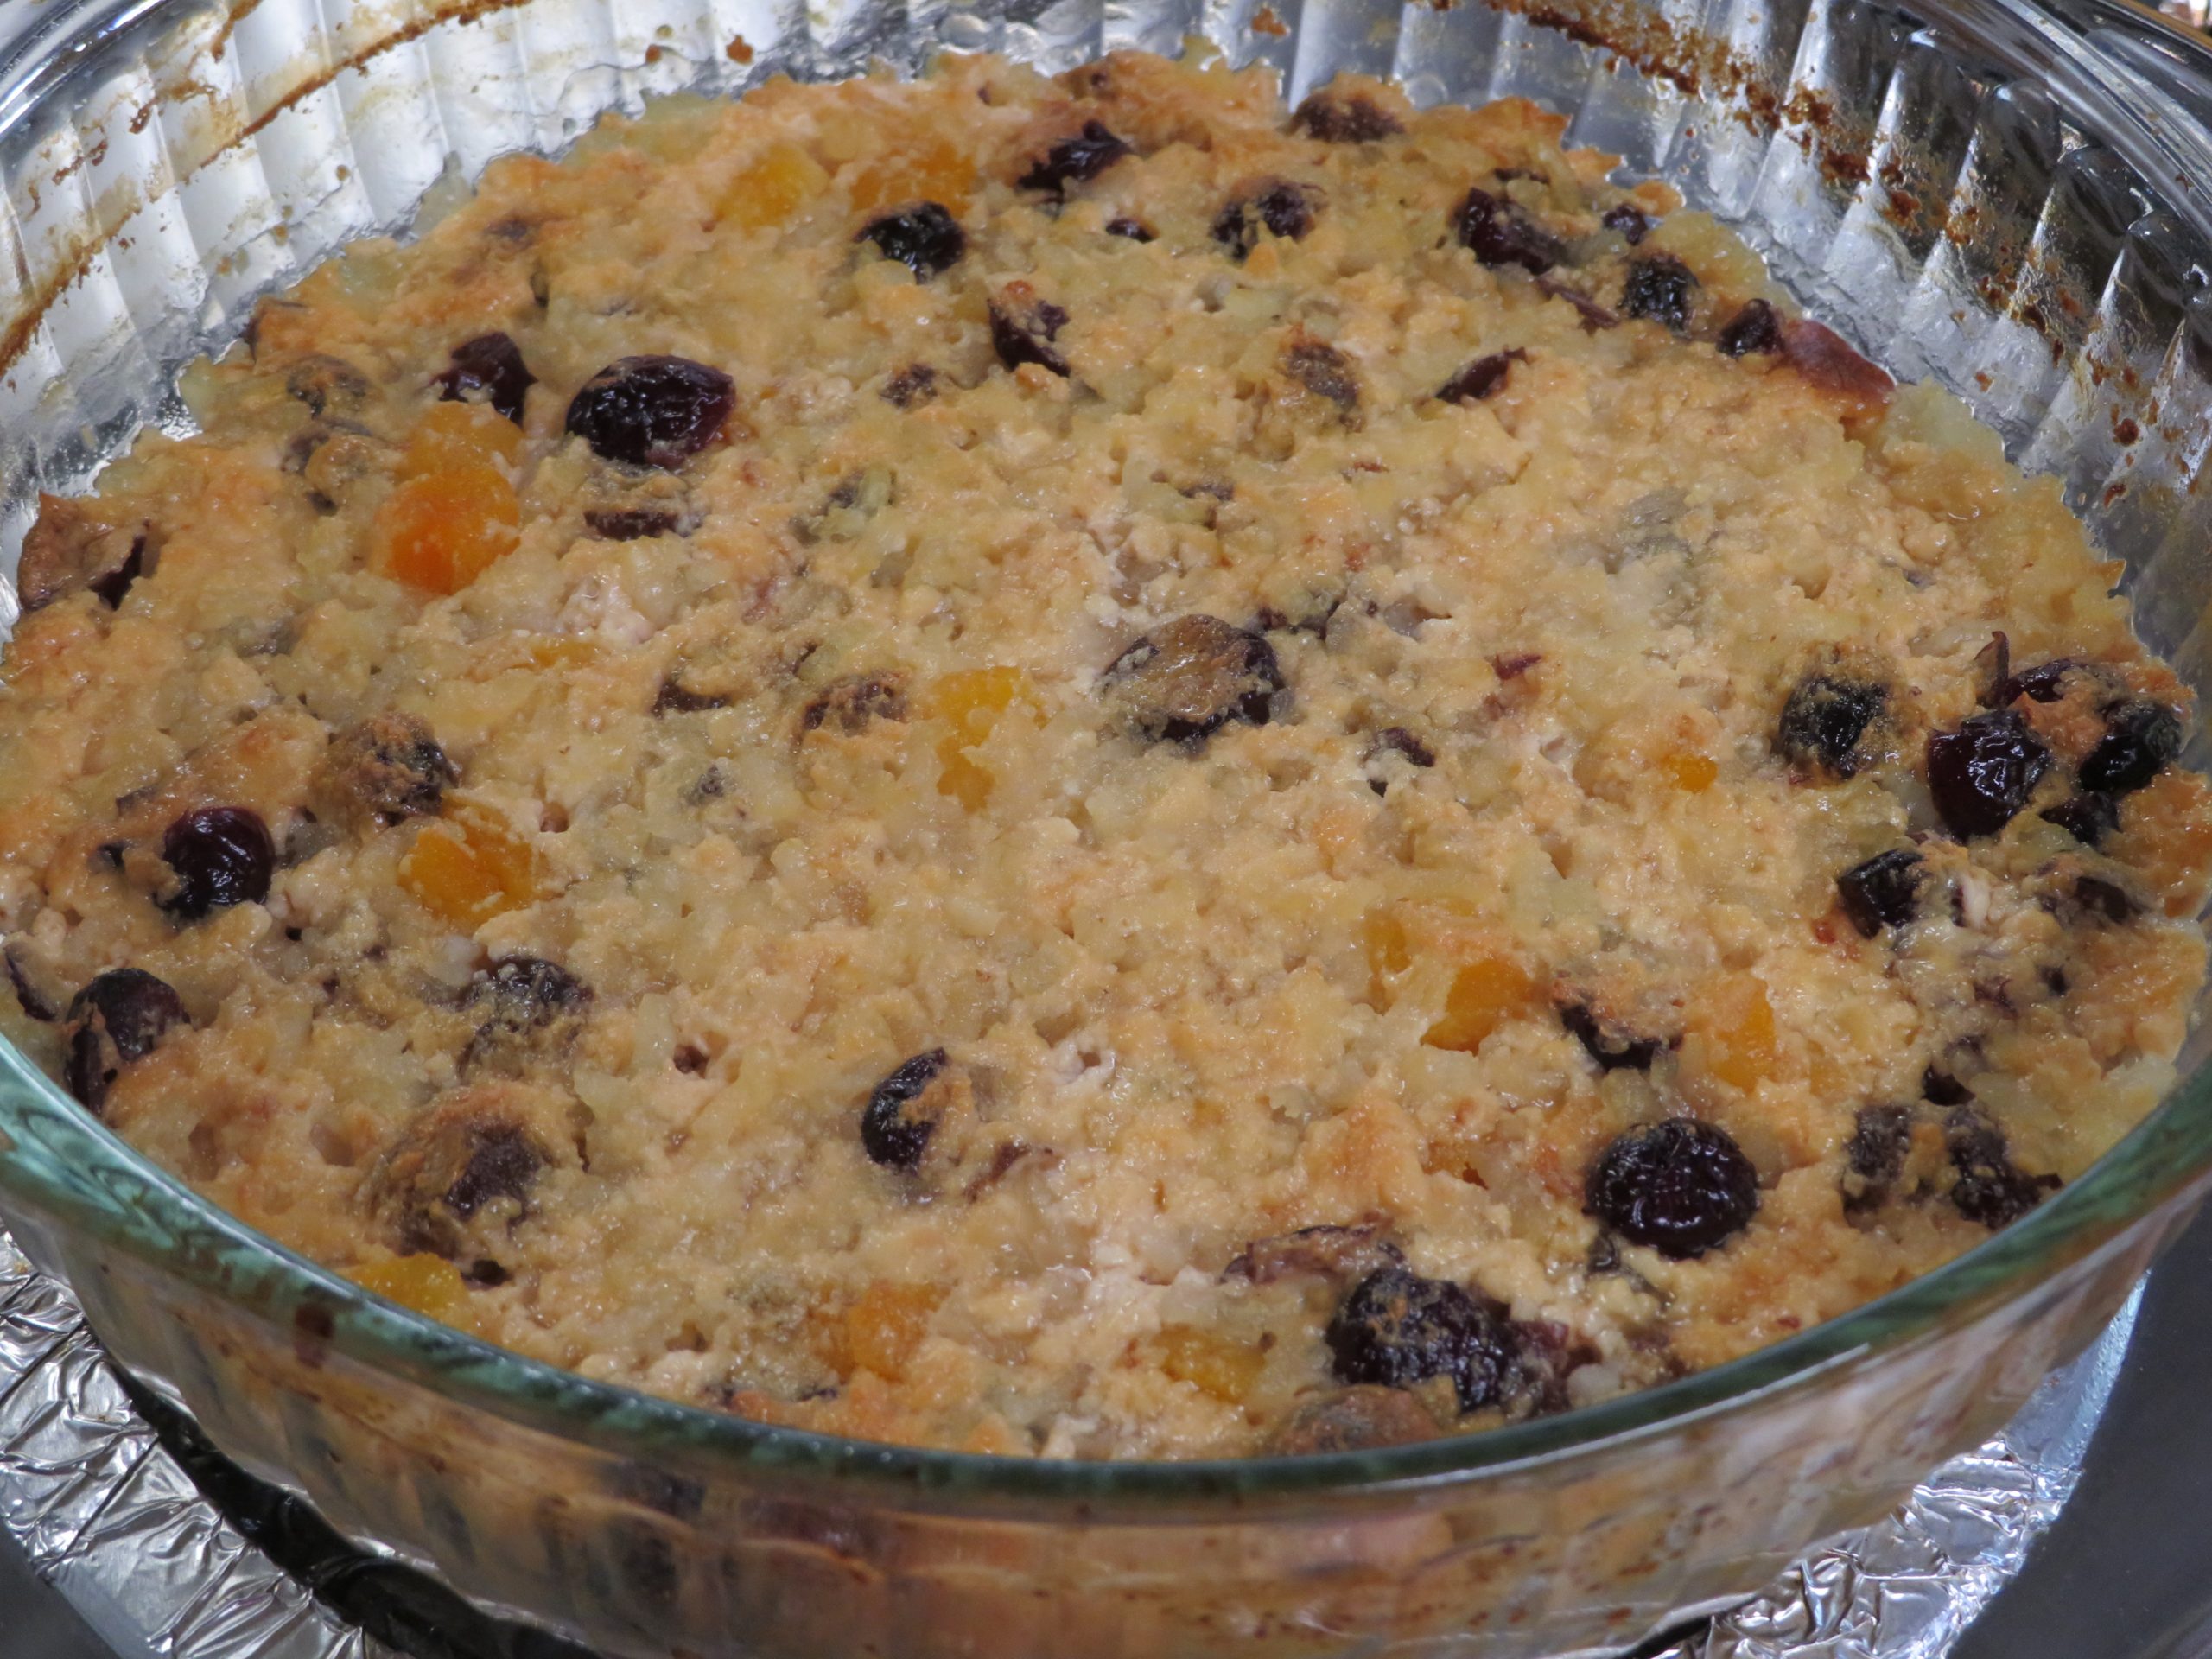 Baked Rice Pudding with golden raisins, dried cranberries, and choped dried apricots